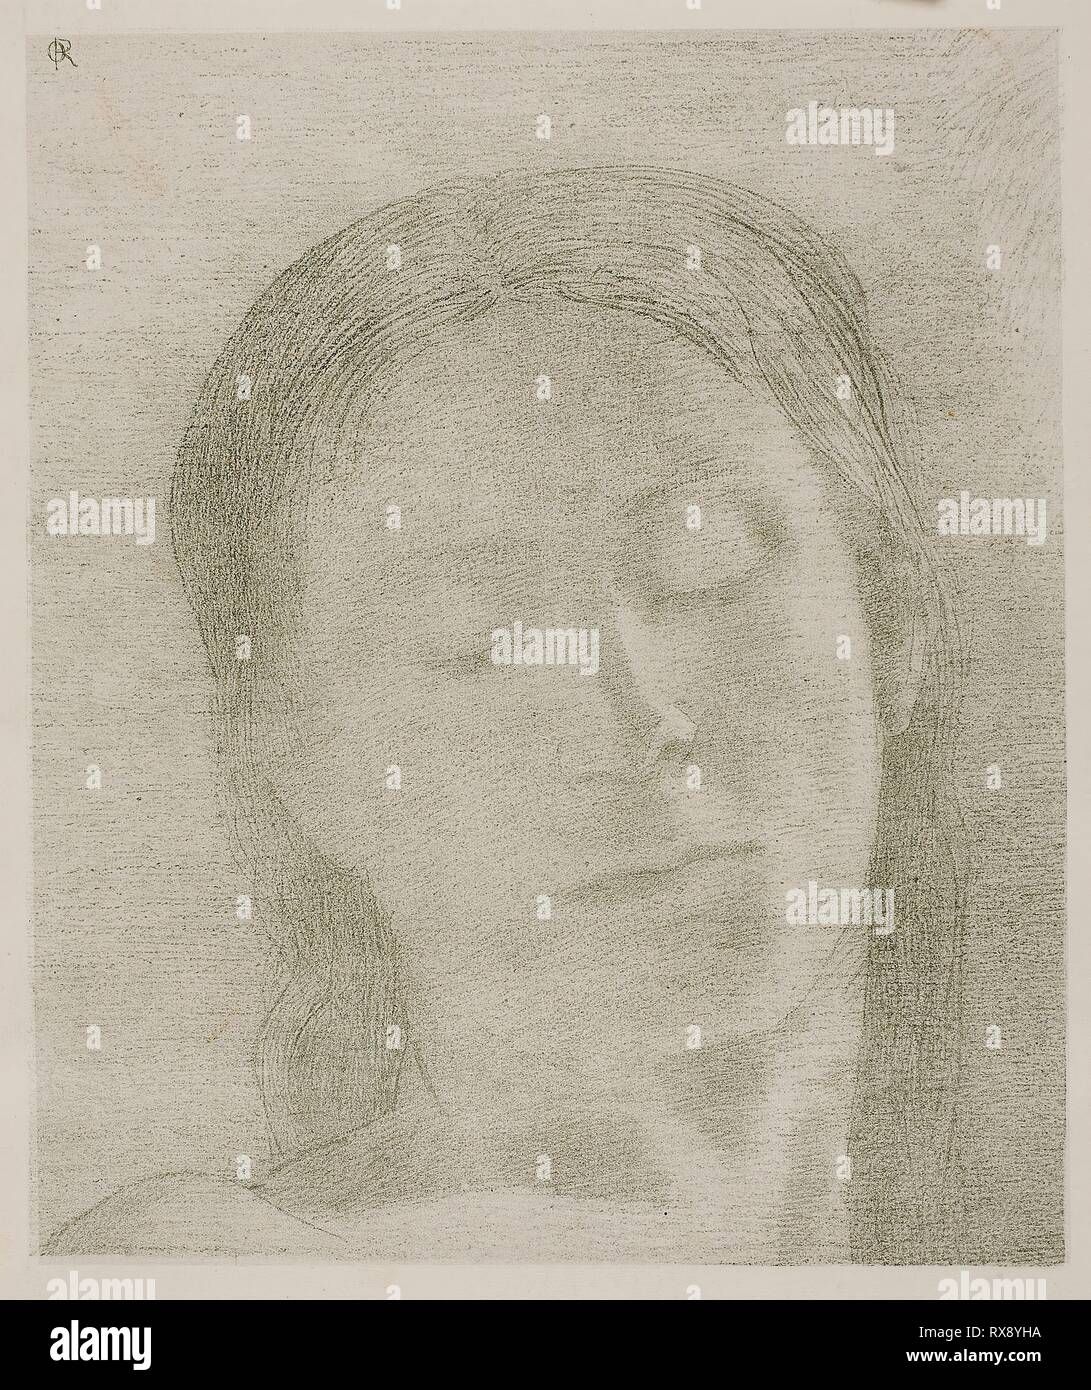 Closed Eyes. Odilon Redon; French, 1840-1916. Date: 1890. Dimensions: 218 × 183 mm (image); 530 × 373 mm (sheet). Lithograph in green on ivory wove paper. Origin: France. Museum: The Chicago Art Institute. Stock Photo